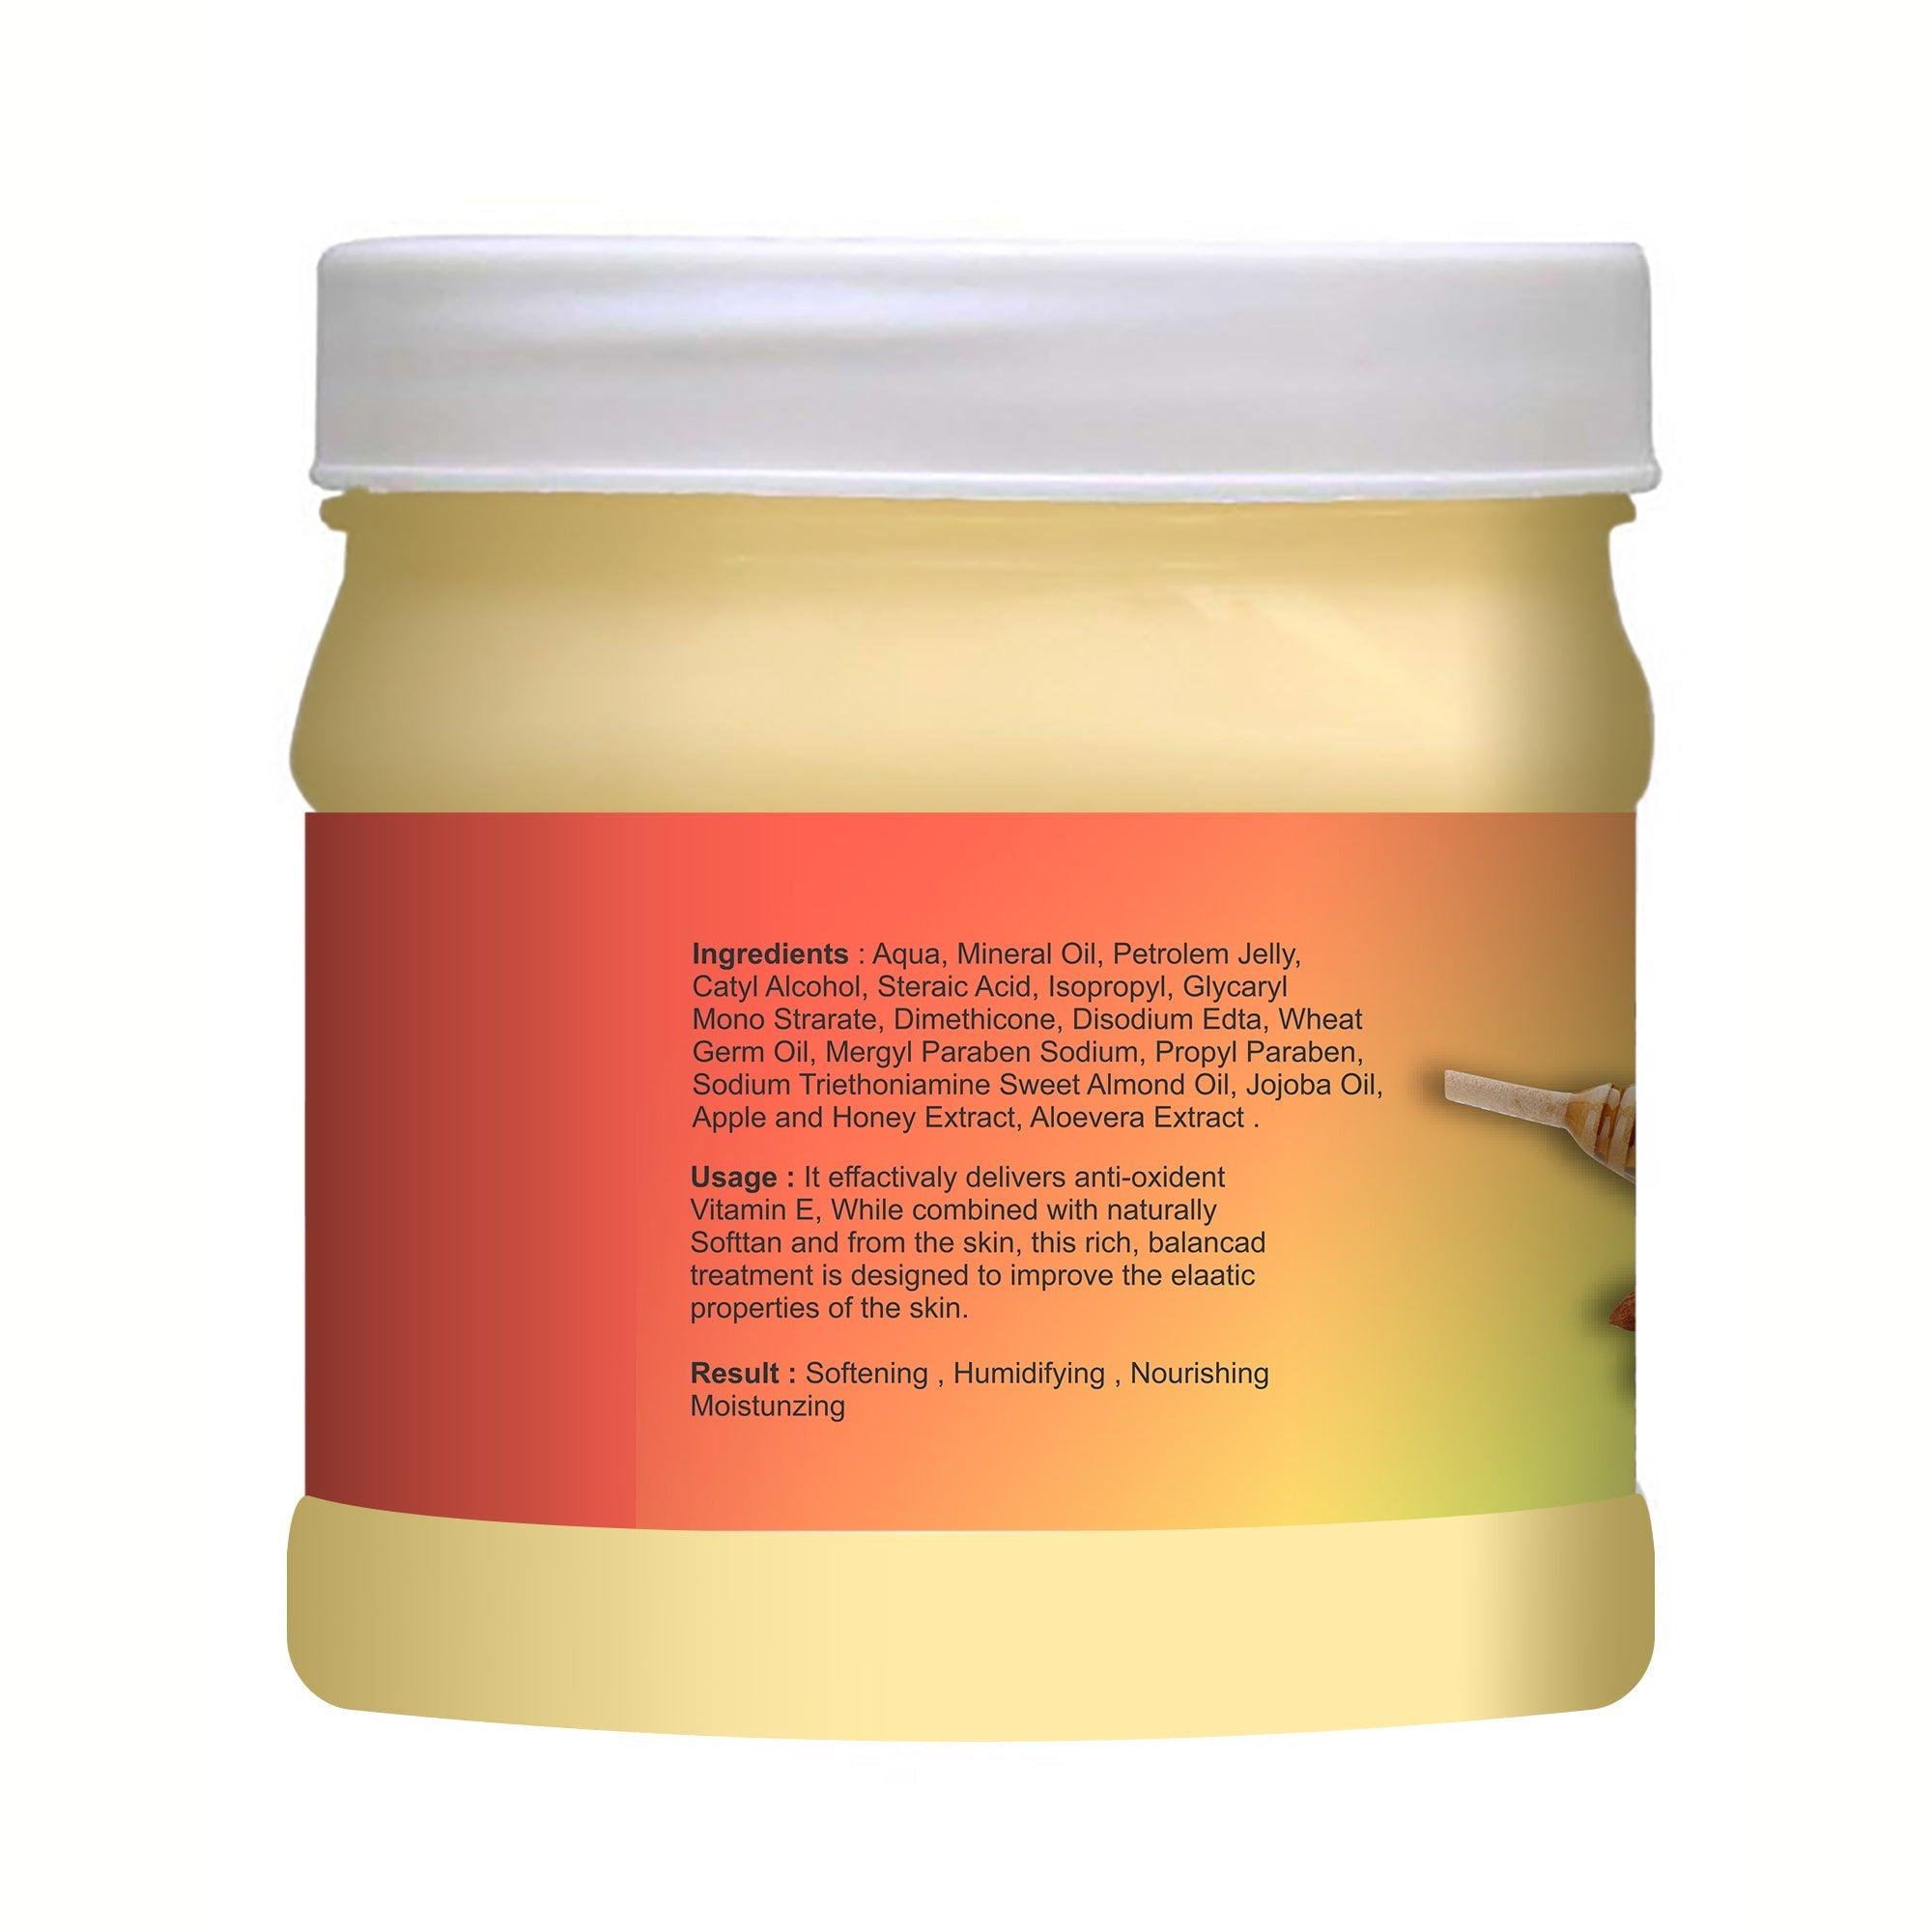 Cold Cream with Honey Almond 500ml - Pink Root